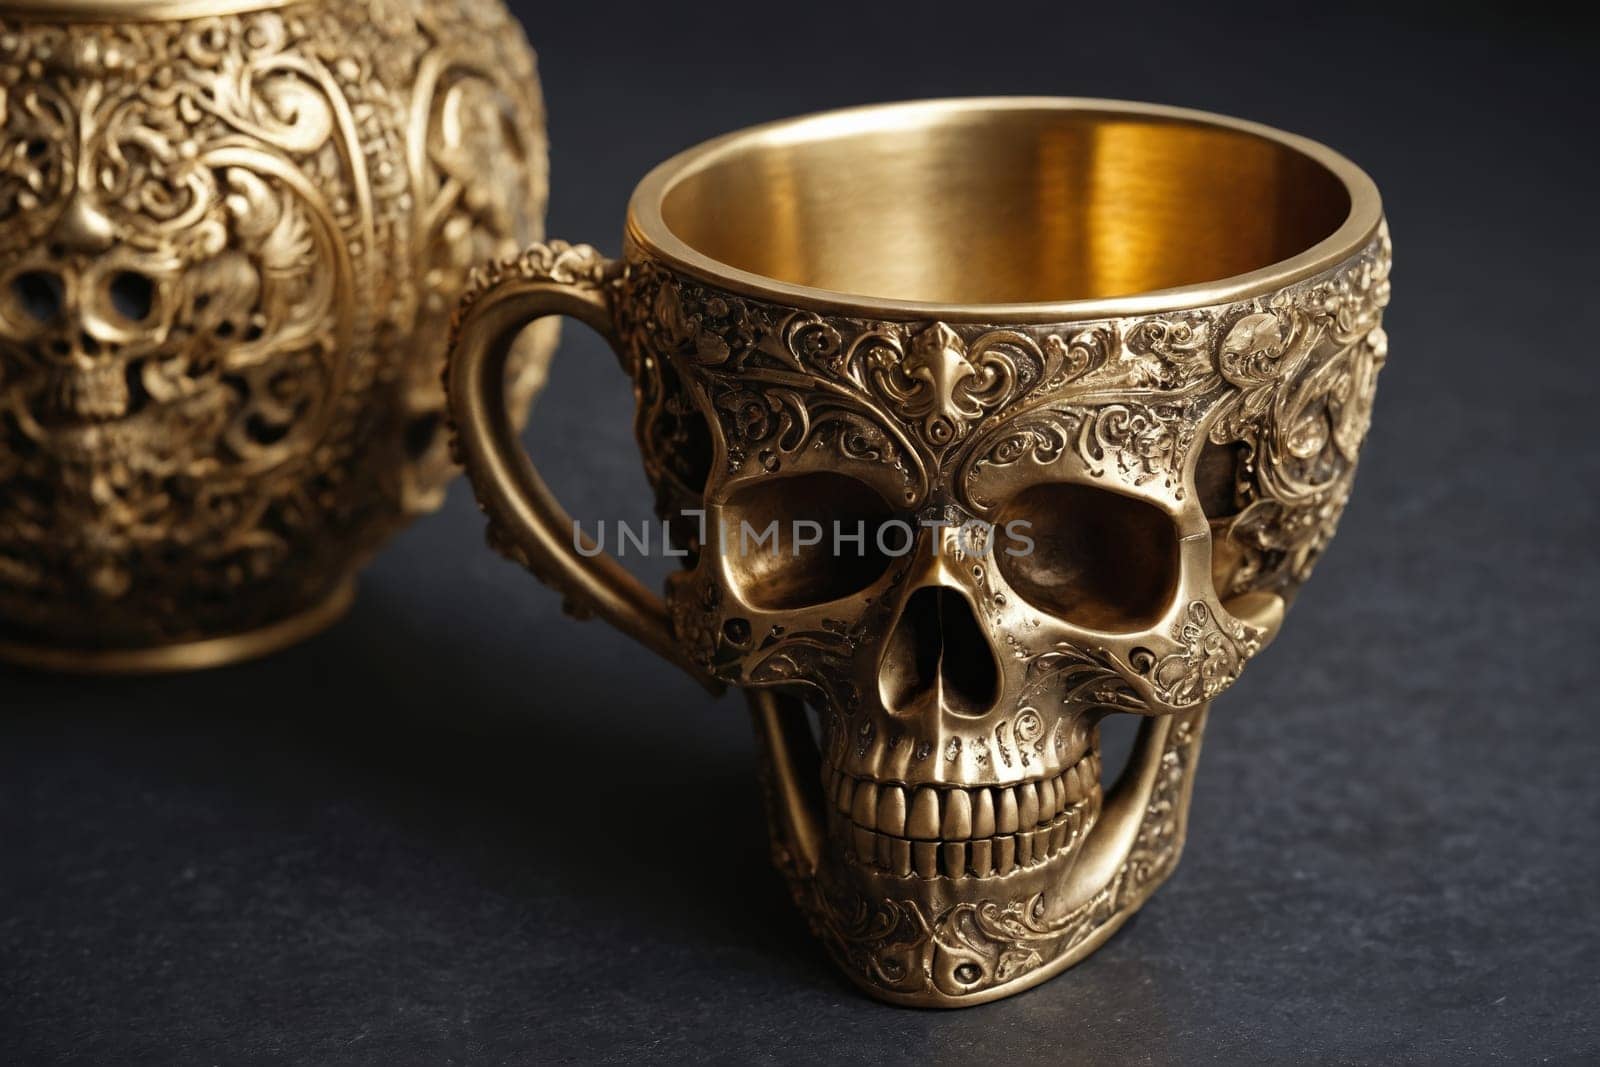 Embark on a historical adventure with this photograph of a skull-shaped drinking vessel with intricate engravings. Suited for antiquity, dark art, or gothic interests.